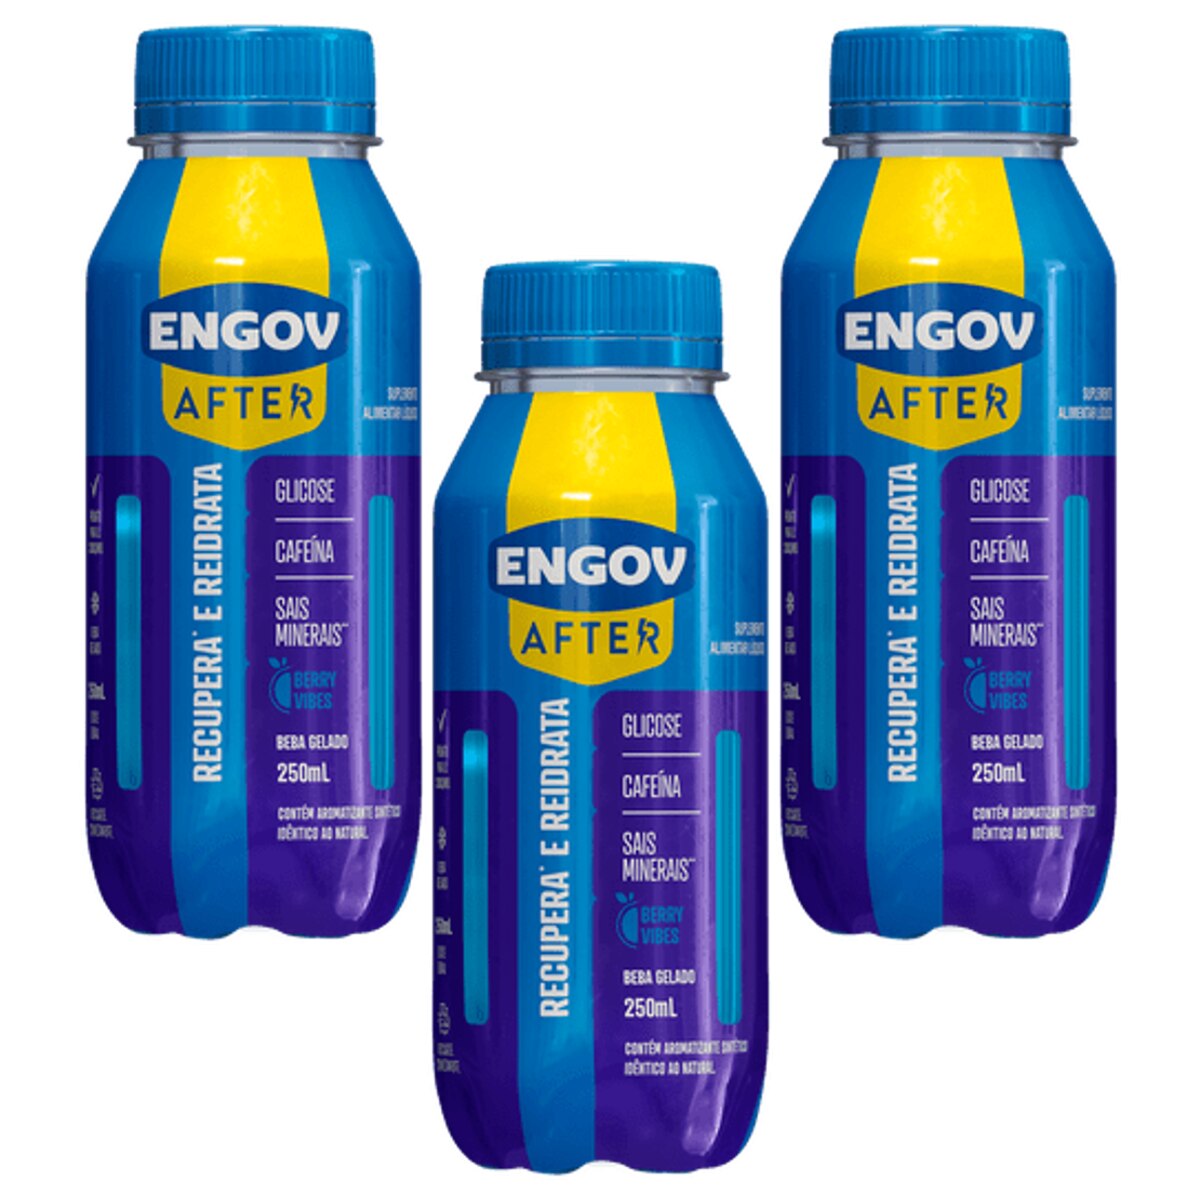 Kit 3 Unidades Engov After Sabor Berry Vibes 250ml